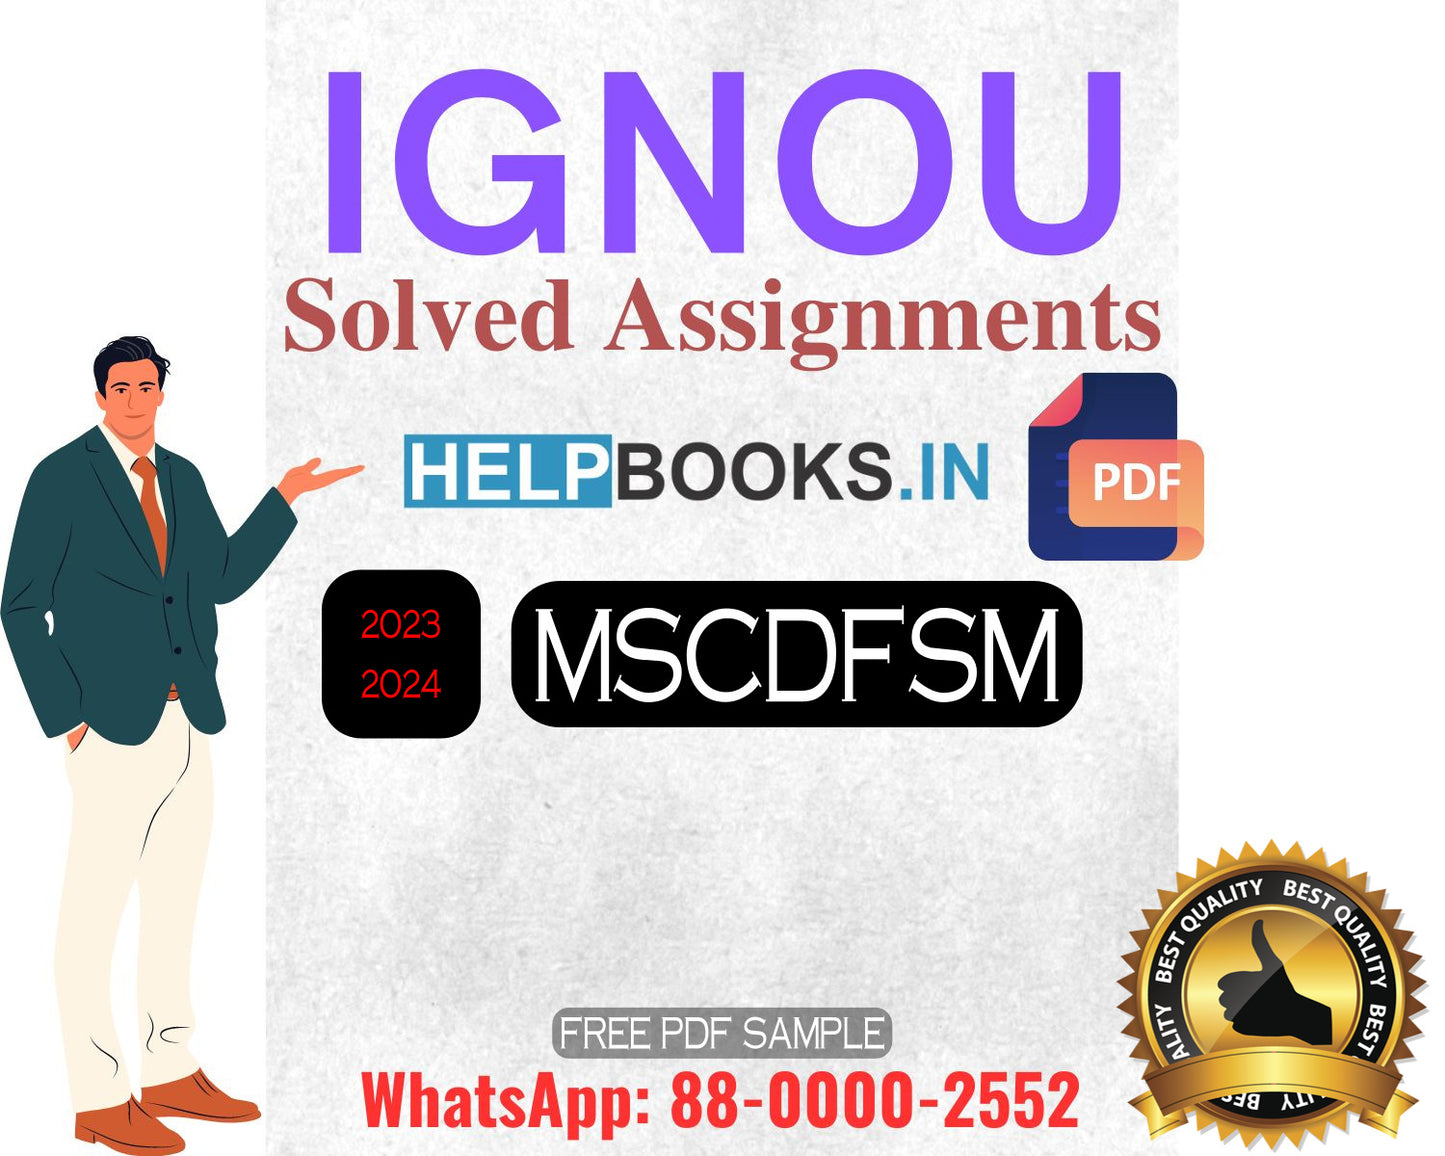 IGNOU Master's Degree Programme Latest IGNOU Solved Assignment 2023-24 : MSCDFSM Master of Science Food Nutrition Solved Assignments